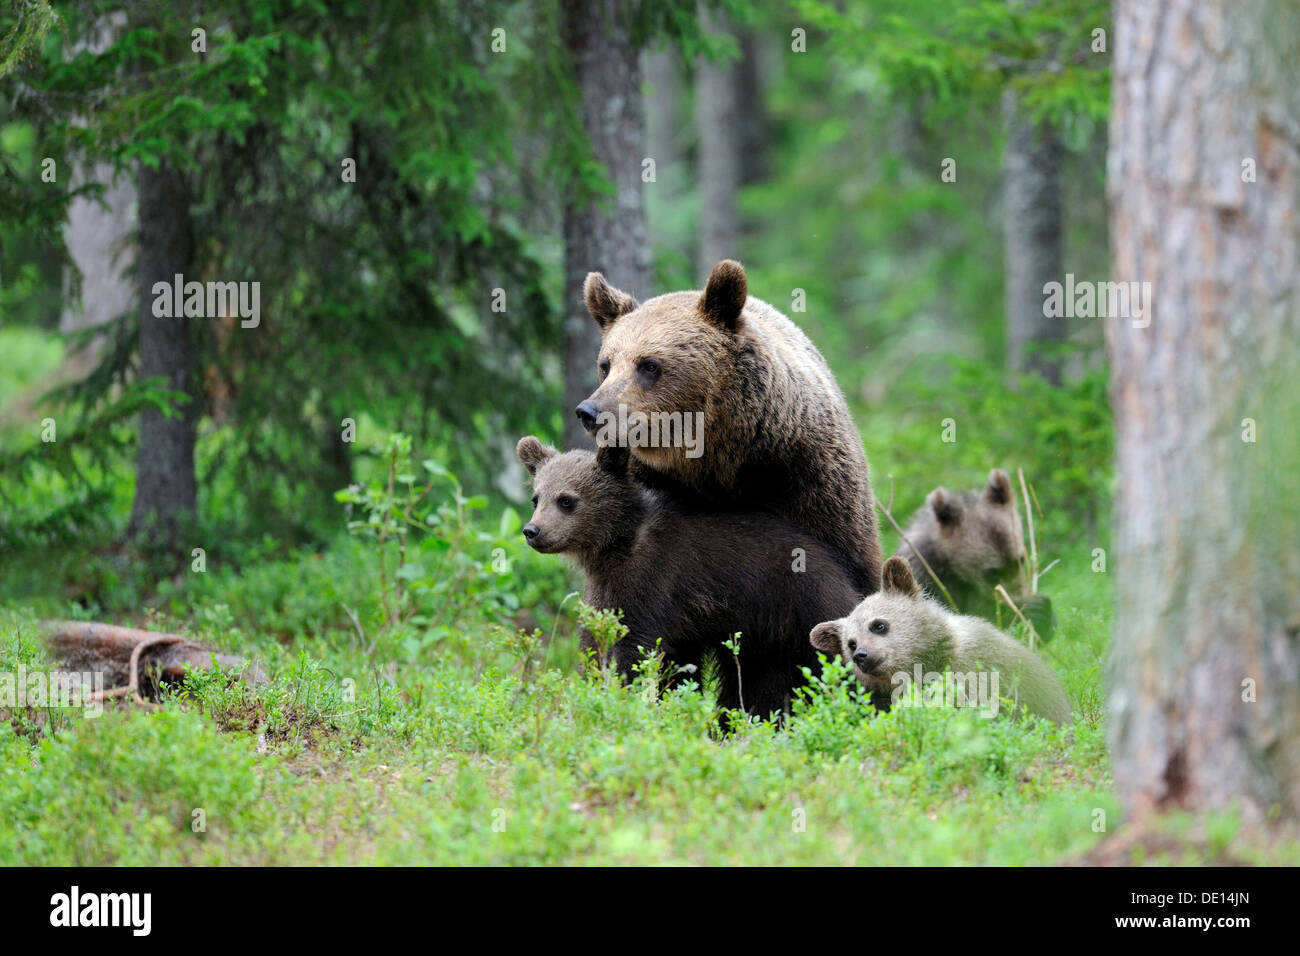 Brown bears (Ursus arctos), female with cubs in the northern coniferous forest, Martinselkonen, Karelia, eastern Finland Stock Photo